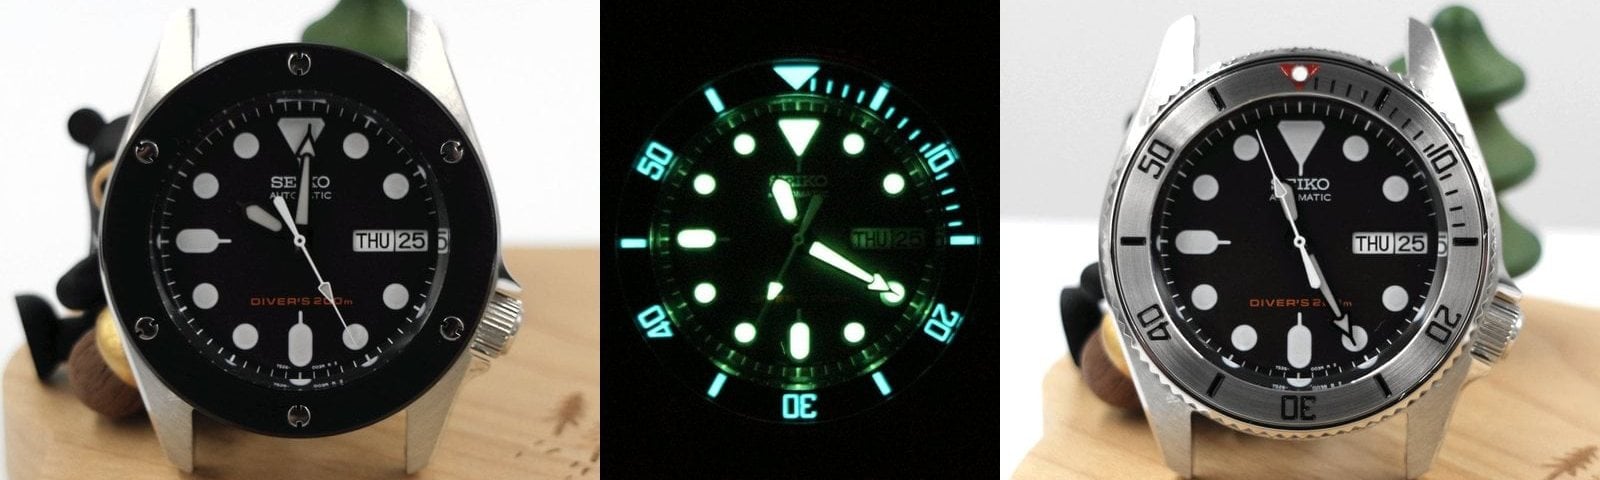 New SKX013 Mod Parts and more!